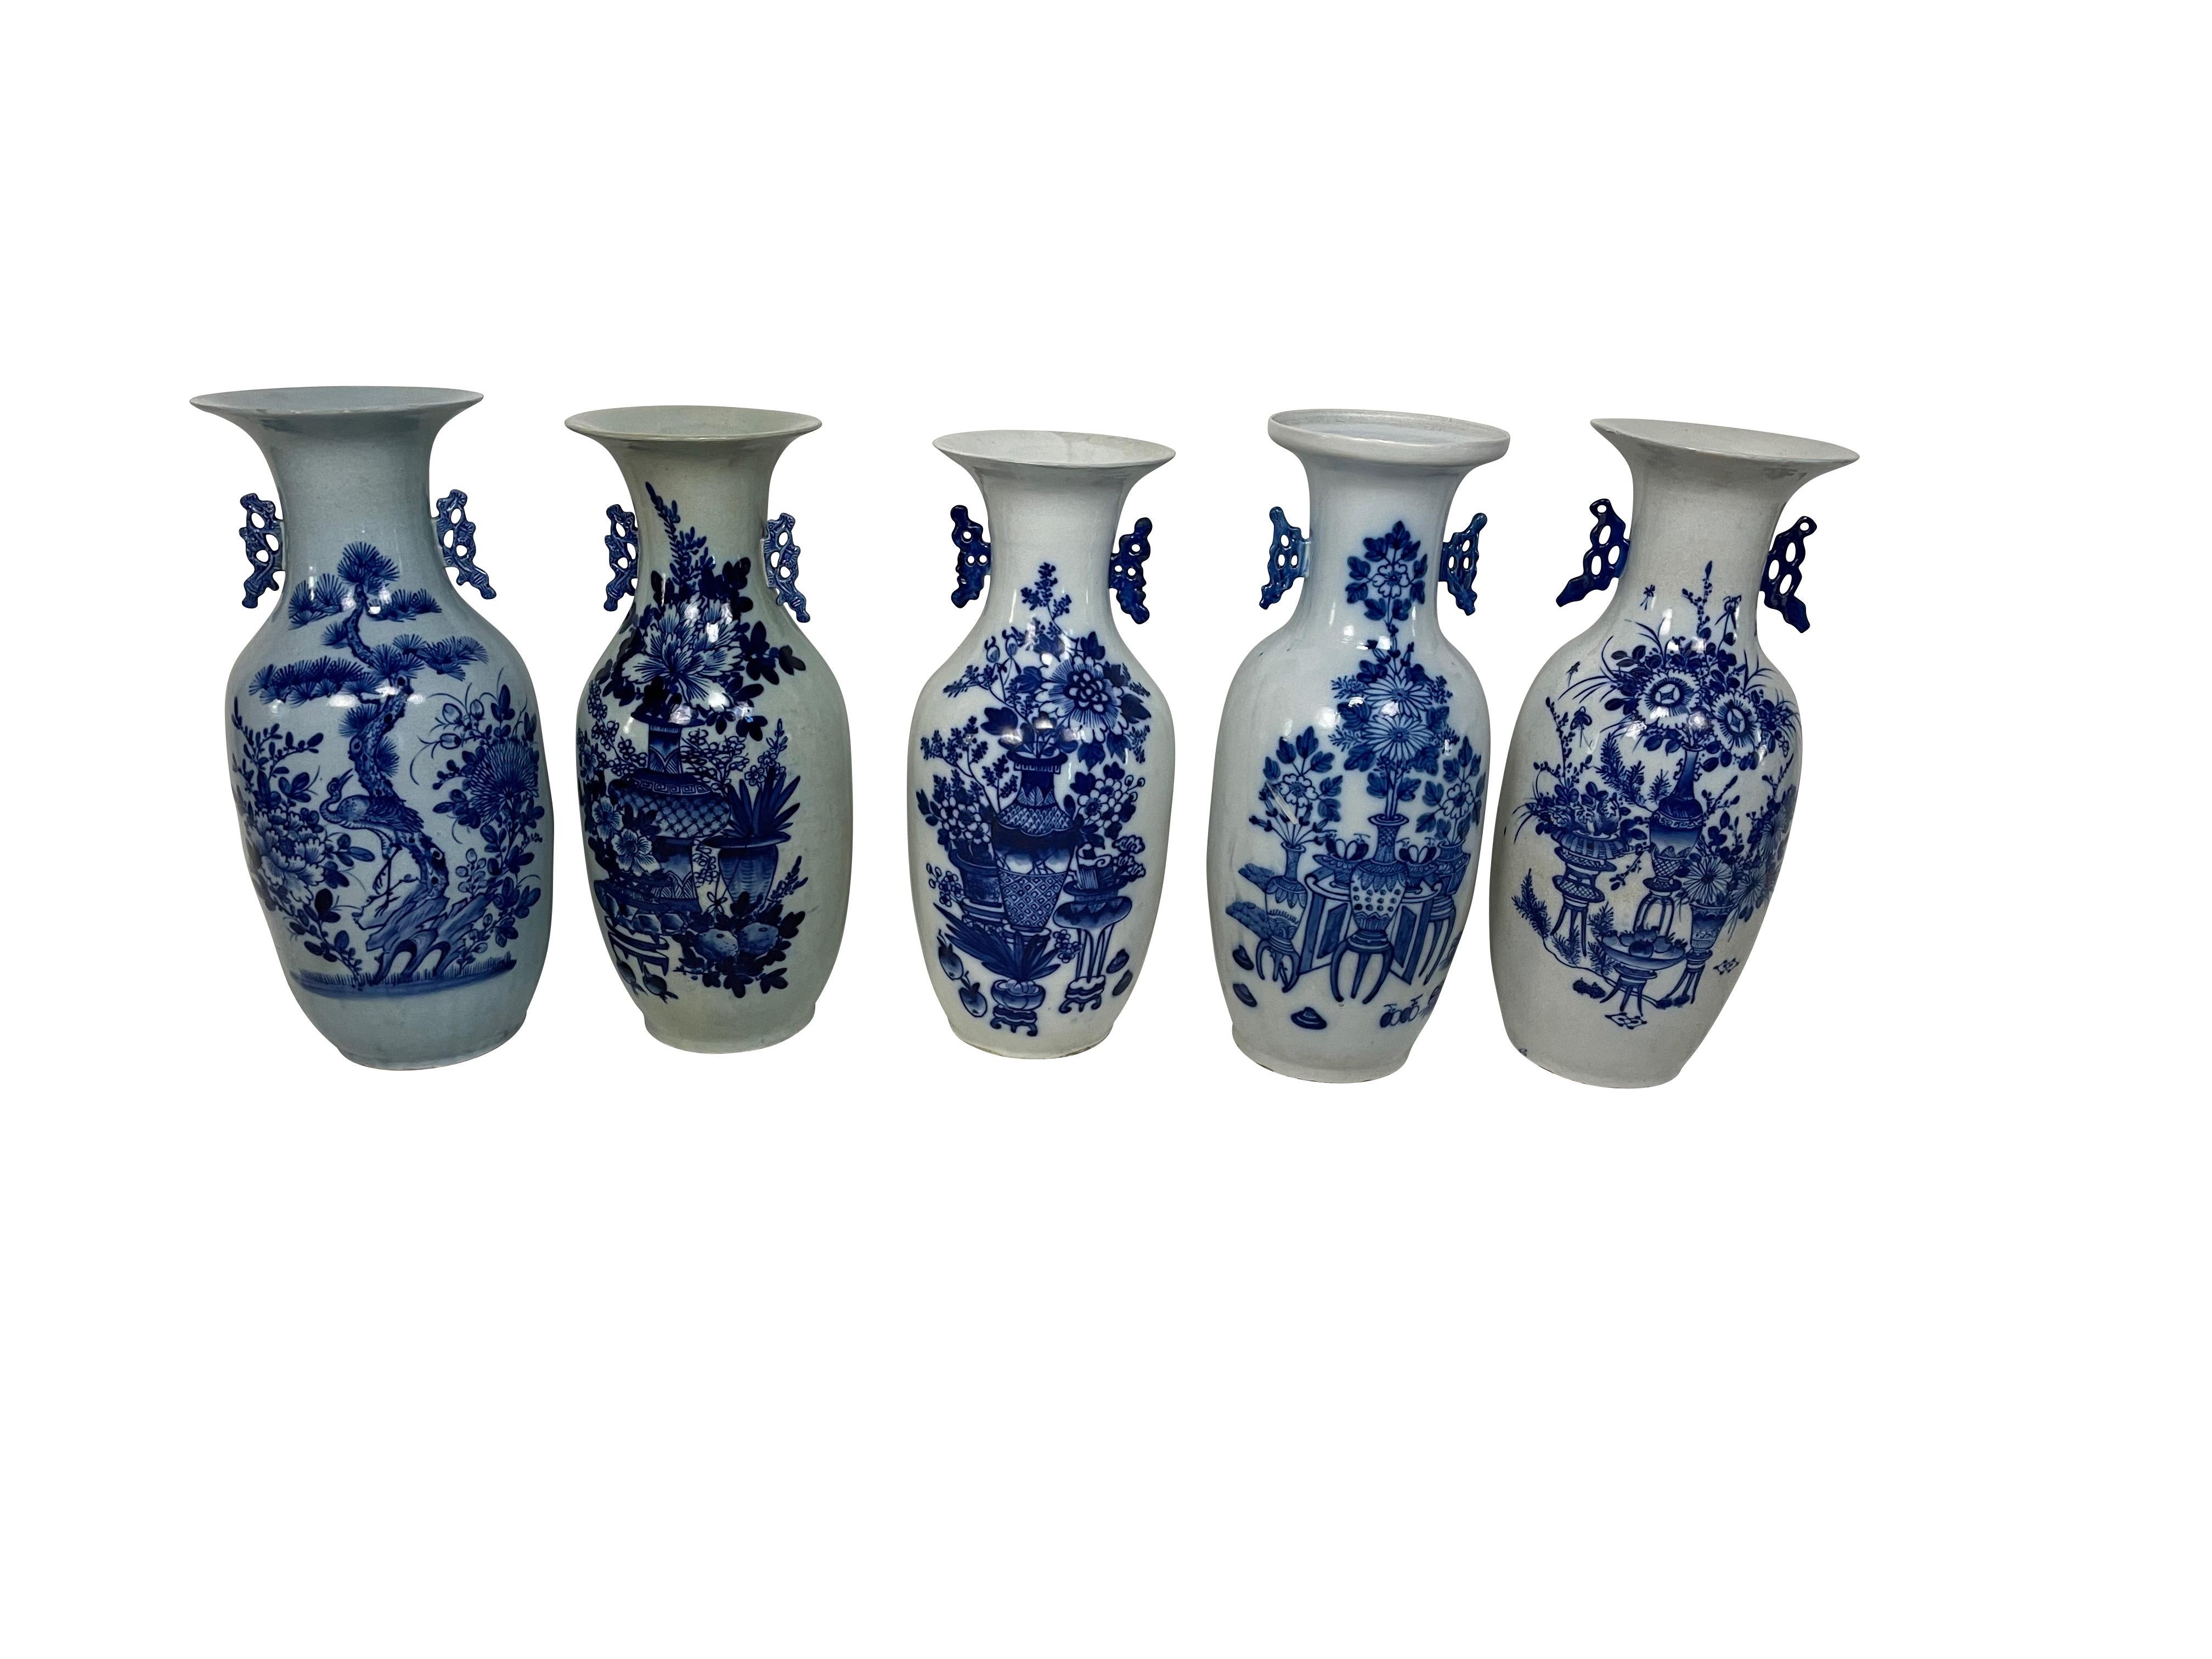 A collection of fine antique Chinese porcelain large baluster vases decorated with various flowers and objects in low relief and decorated in underglaze blue within a white glazed ground. The vase has molded stylized handles to either side of the